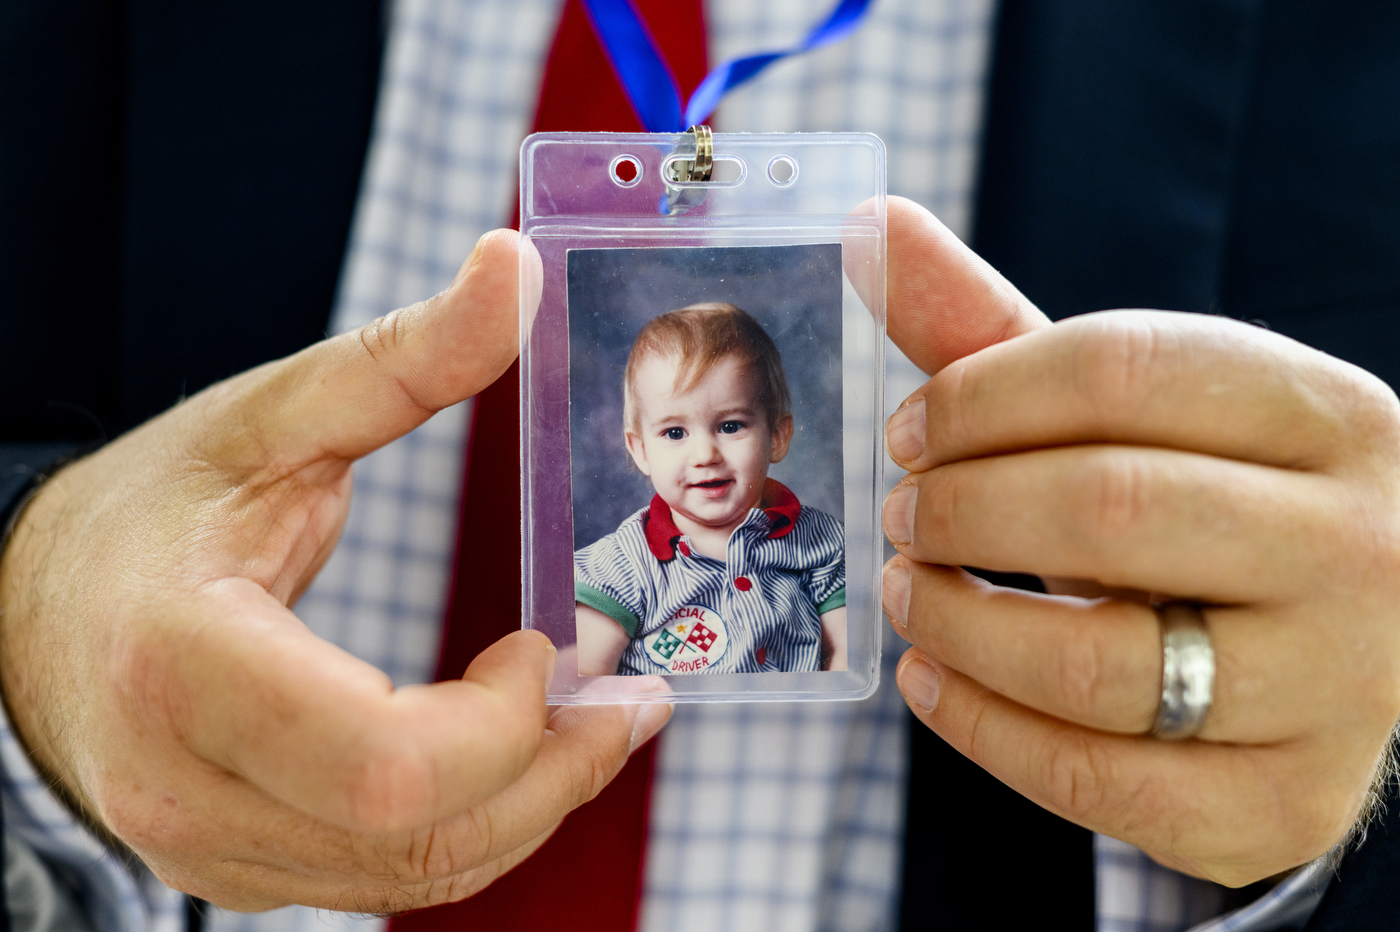 Detwiler, holding a lanyard to the camera--inside is a photo of his son, Riley. Riley looks to be a young toddler with red hair and dark eyes. He's wearing a striped shirt.